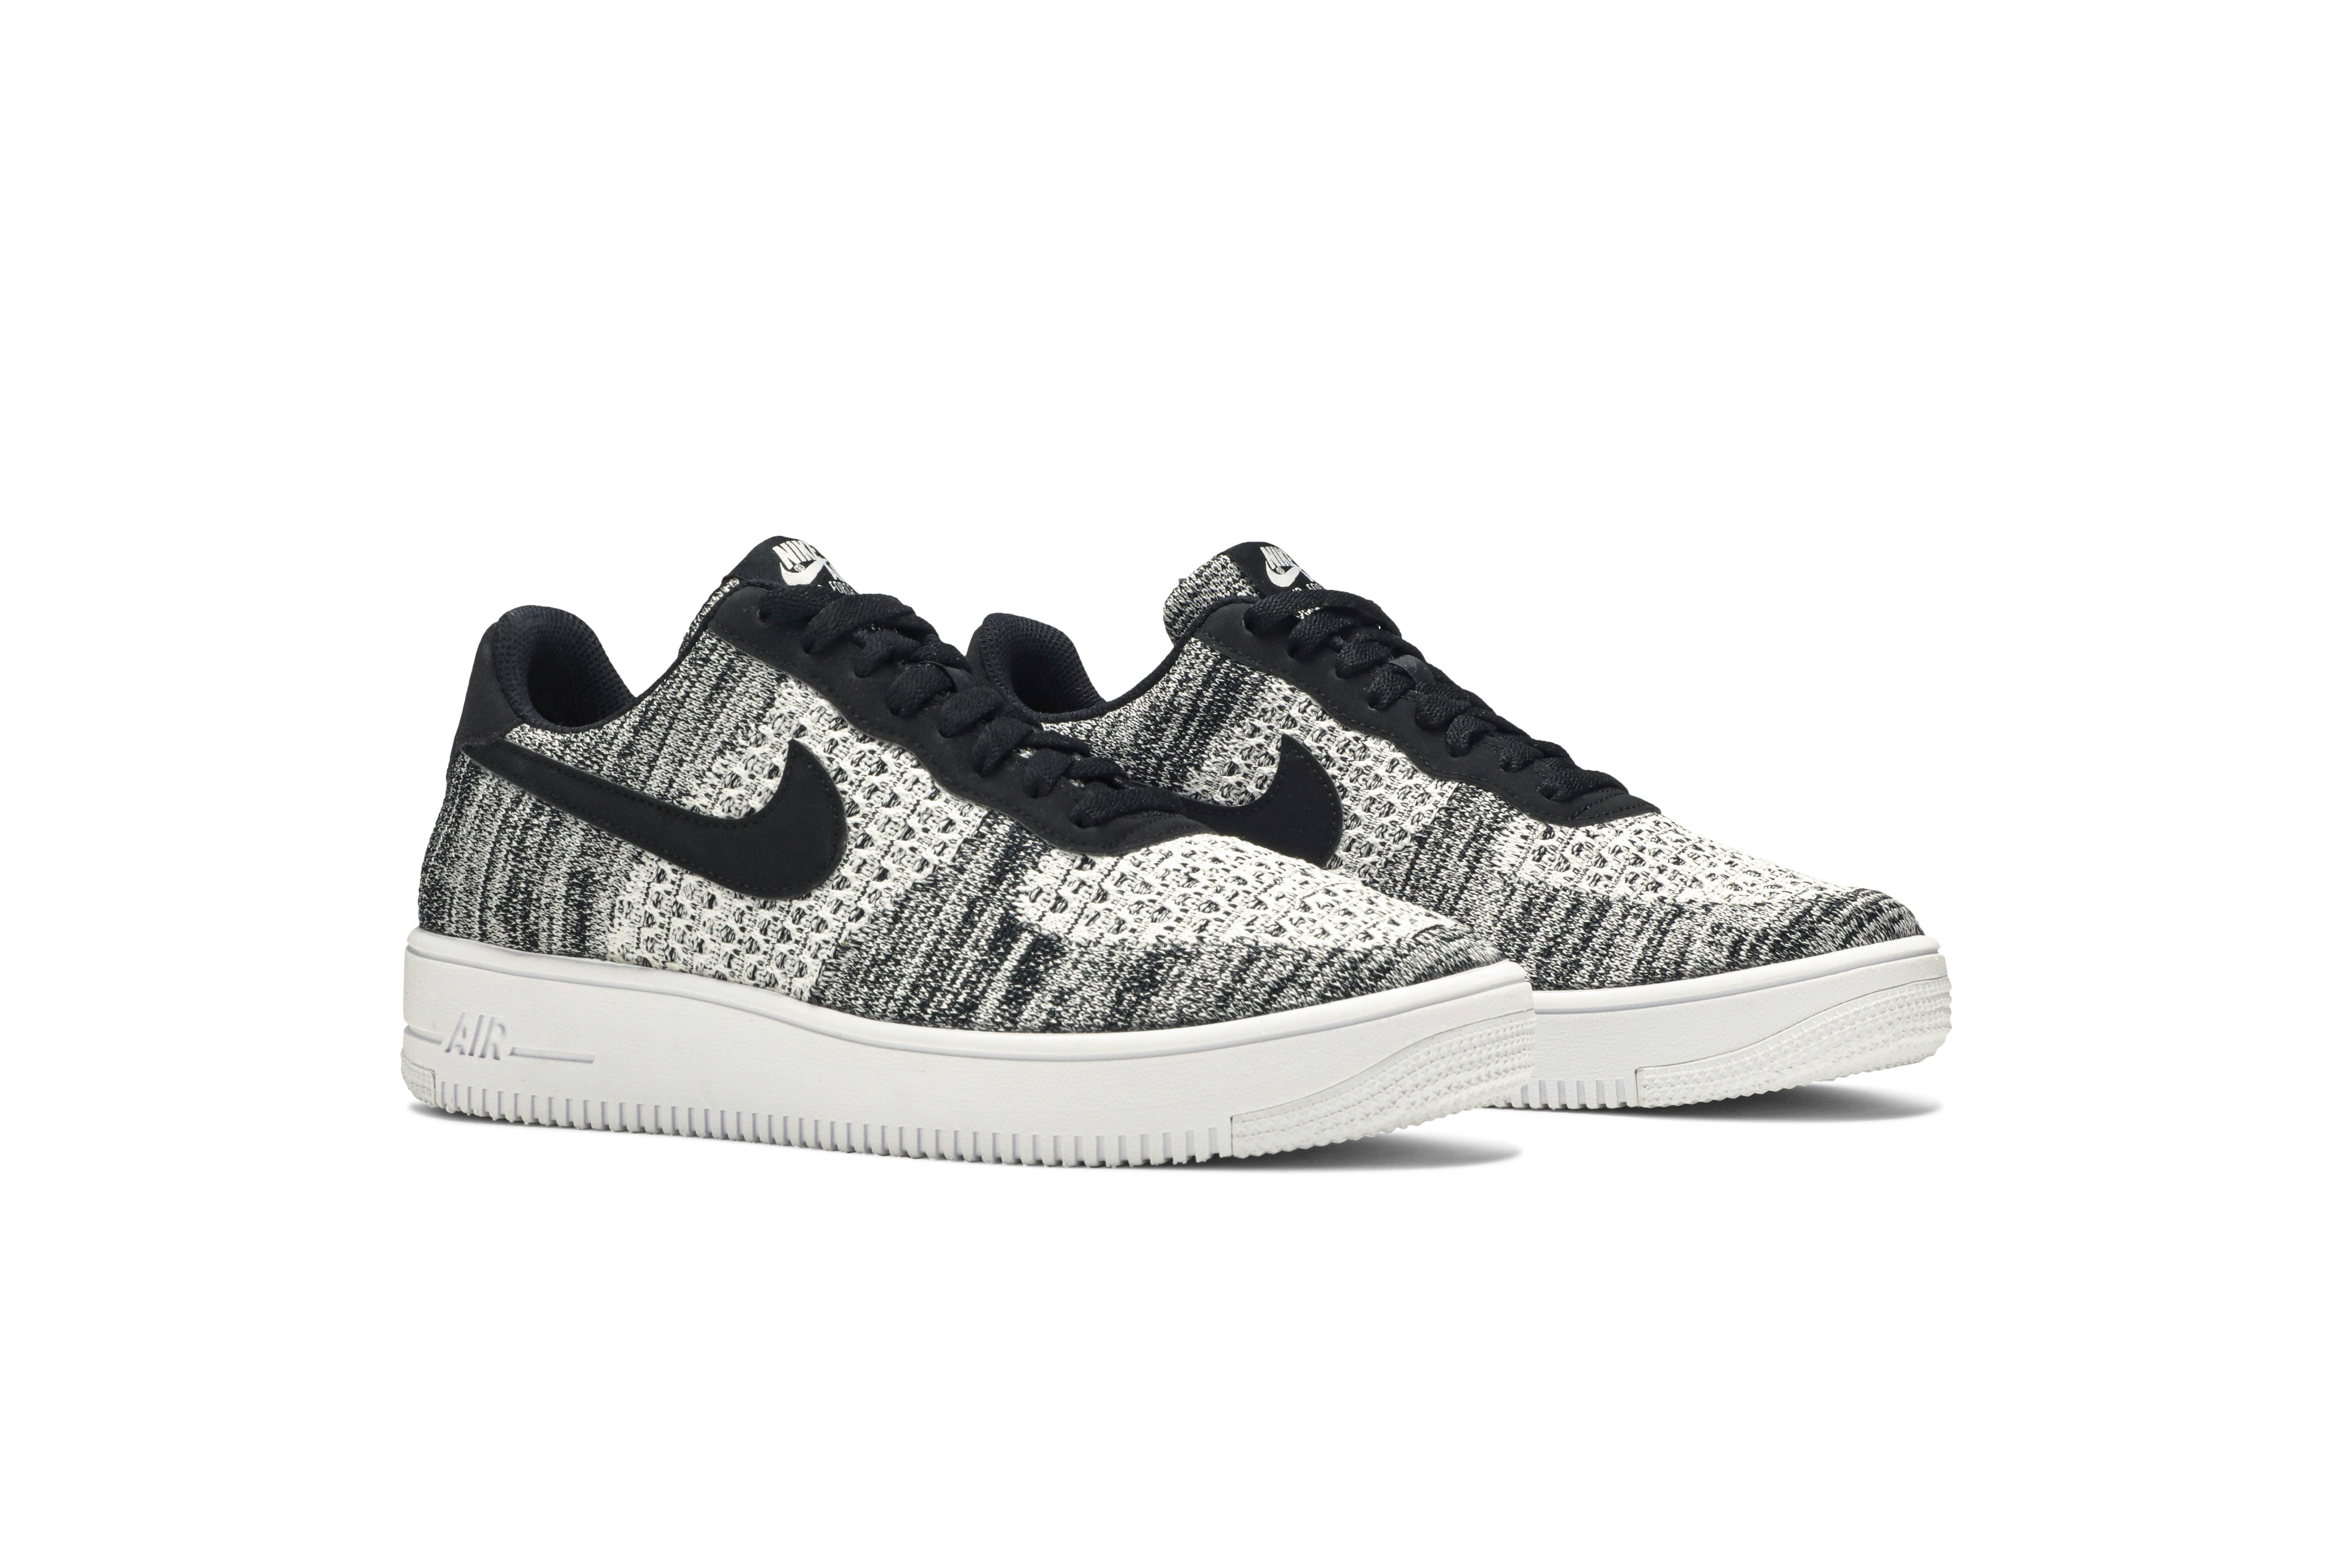 Nike Rubber Air Force 1 Flyknit 2.0 Trainers in Black/White (Black) for Men  - Save 69% - Lyst